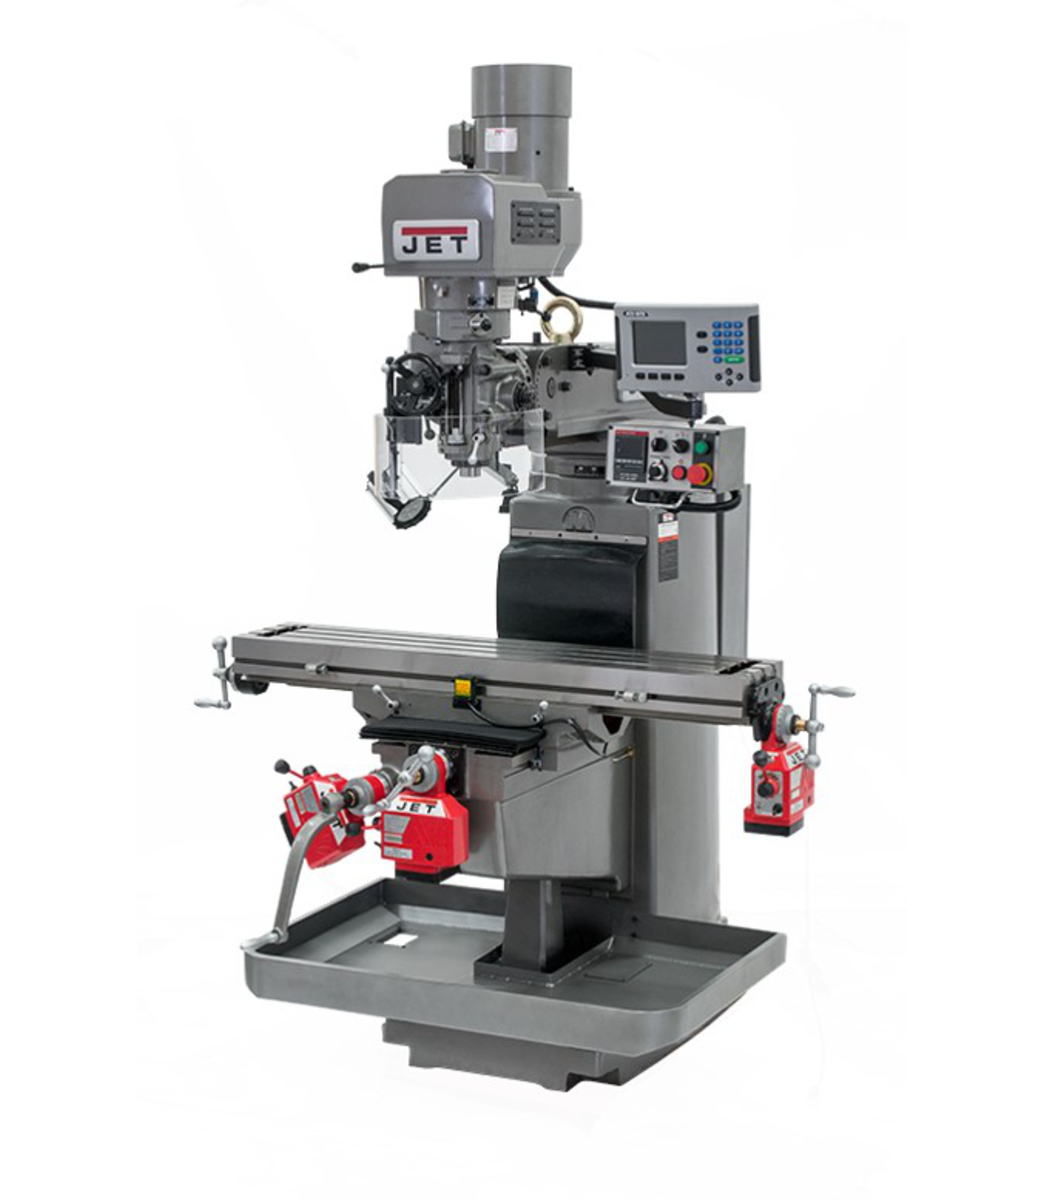 690680, JET JTM-1050EVS2 Vertical Milling Machines are durable enough to be the workhourses of your operation, and come with add-ons and features that give you great milling flexibility